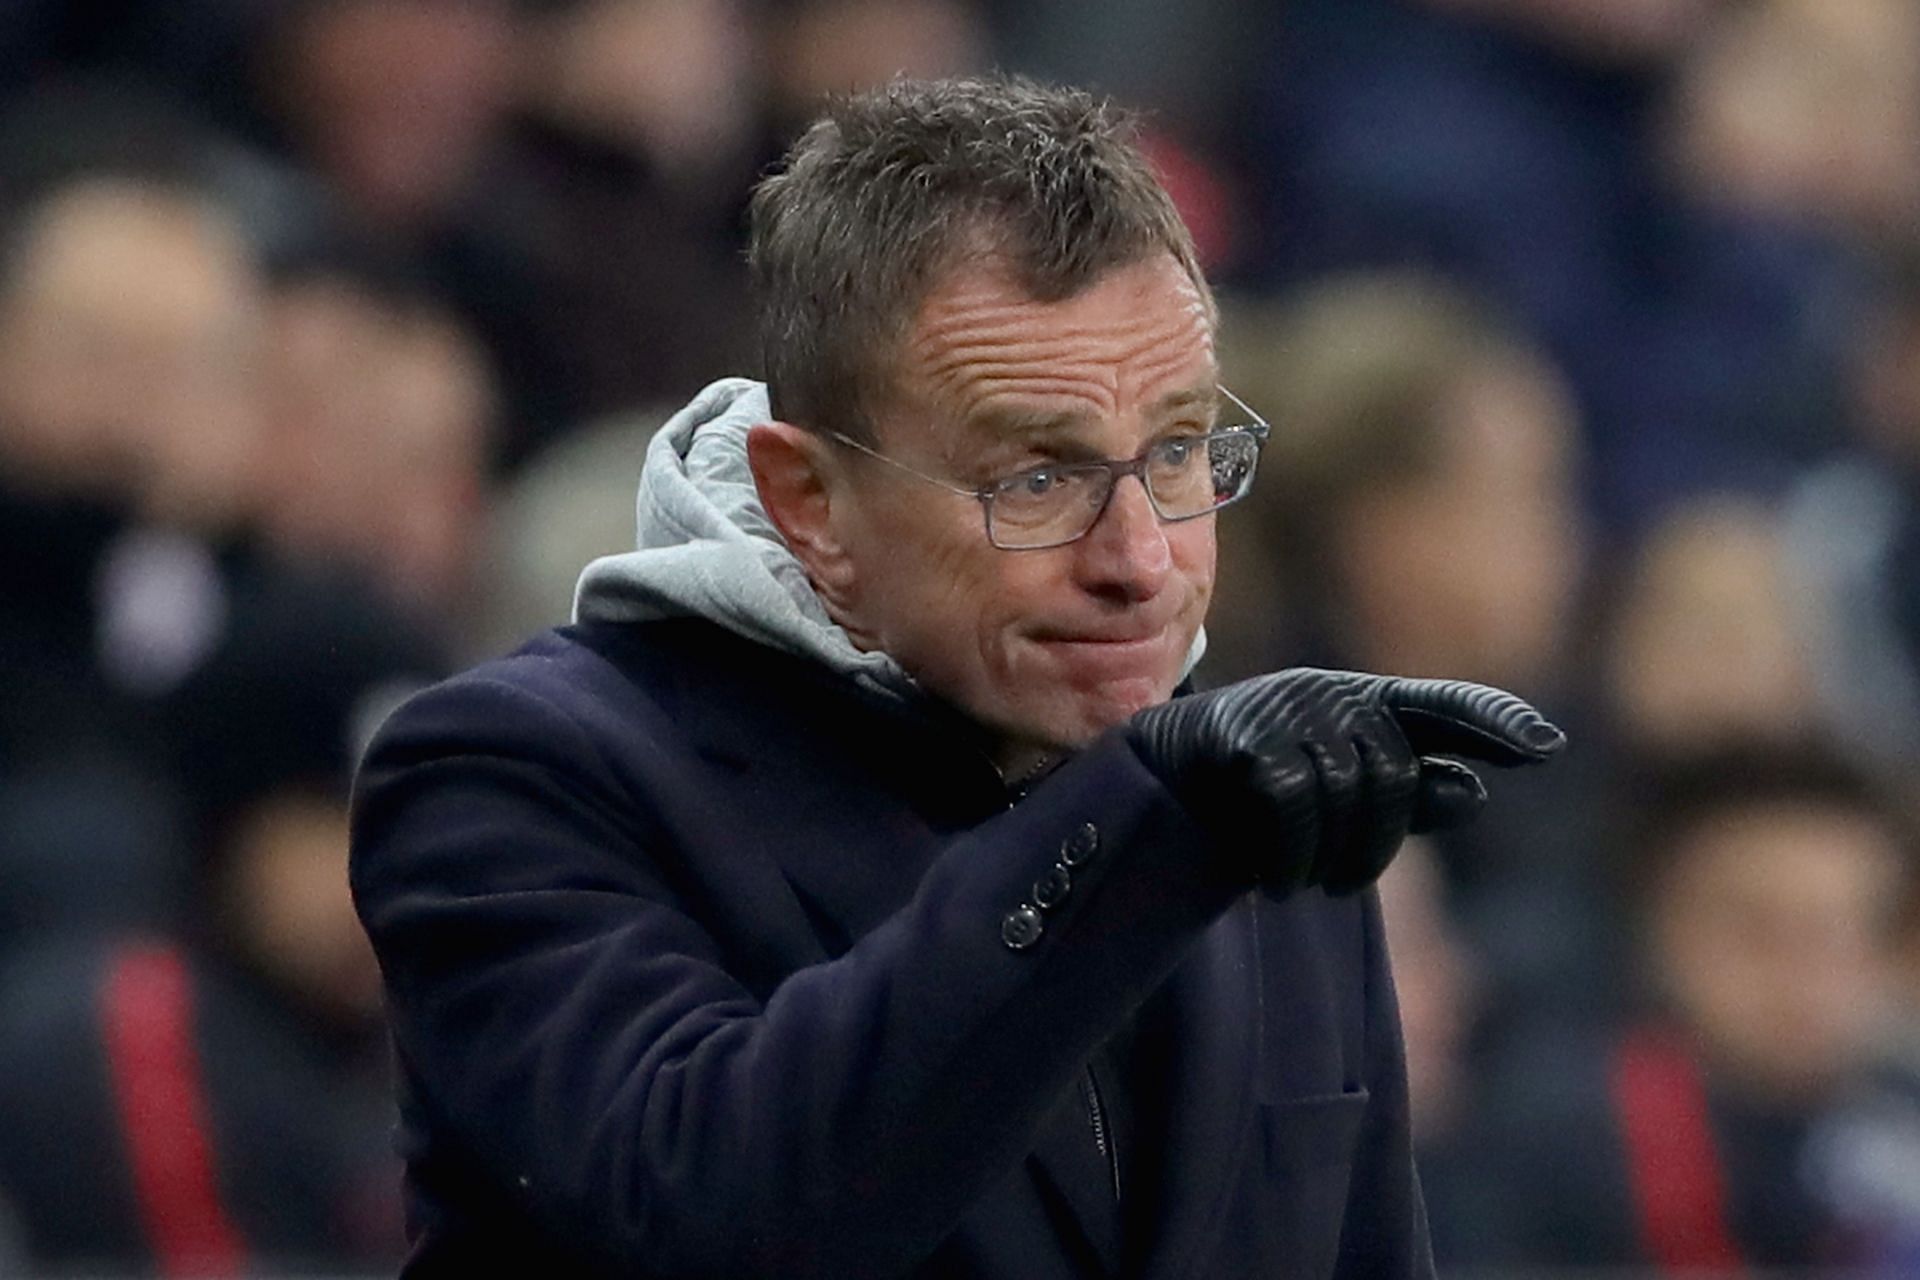 Ralf Rangnick chose to start Diogo Dalot in his managerial debut at Manchester United.